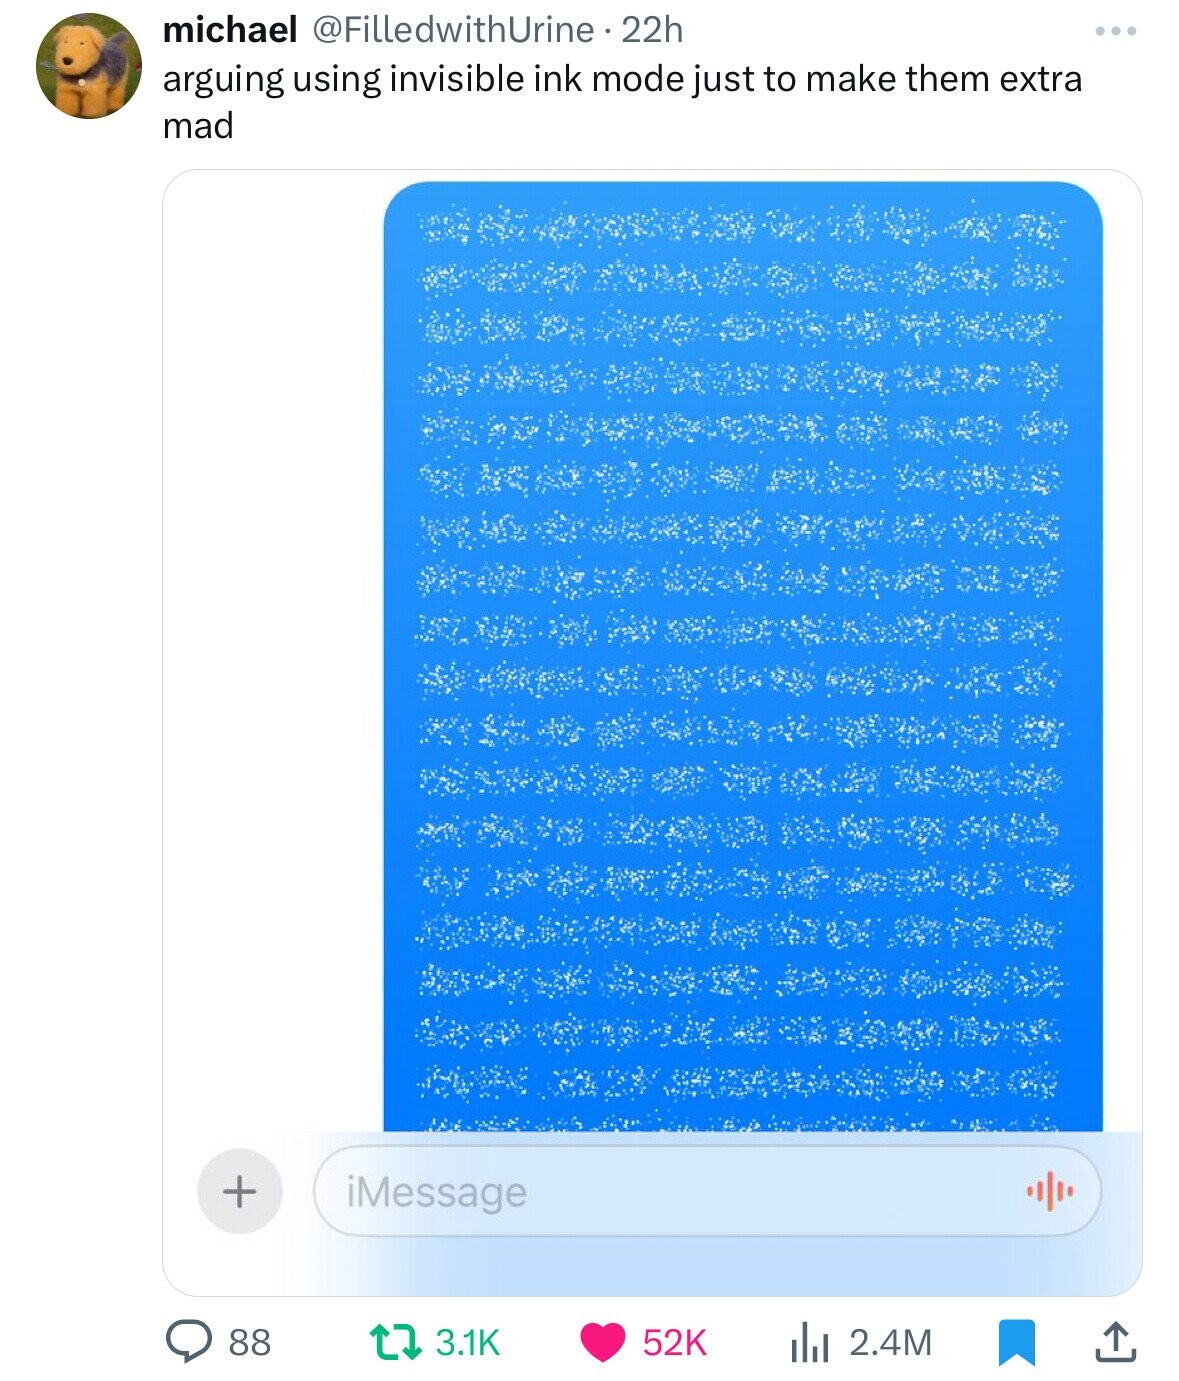 screenshot - michael 22h arguing using invisible ink mode just to make them extra mad 88 iMessage 52K 2.4M ...